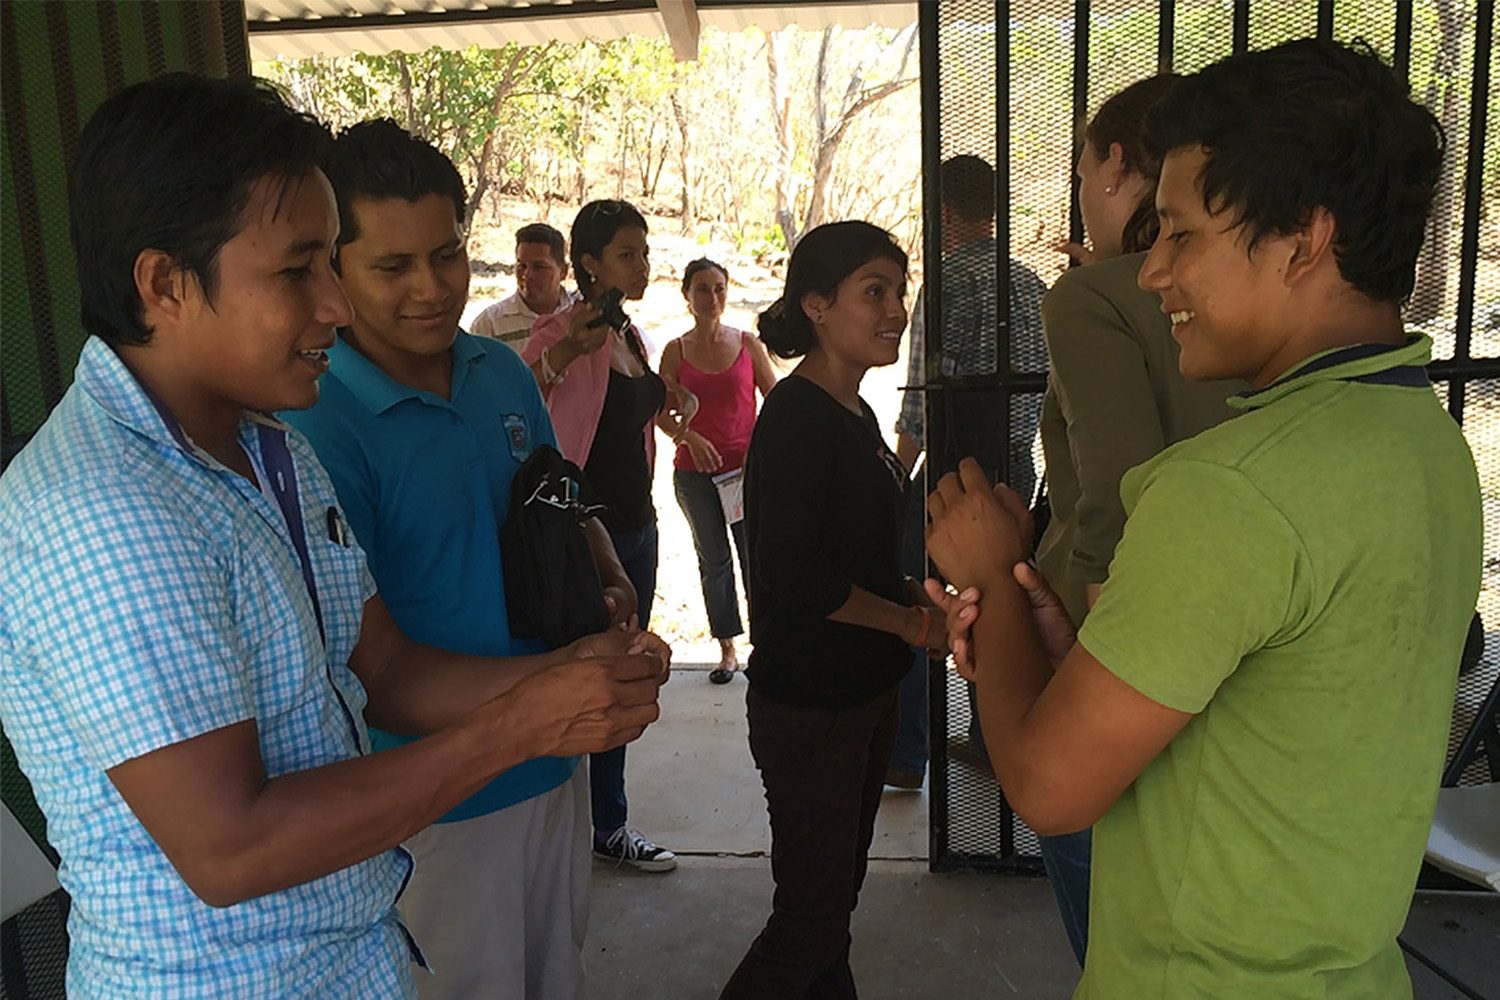 Erlin is presenting Ometepe students with Tocci memory stick bracelets.